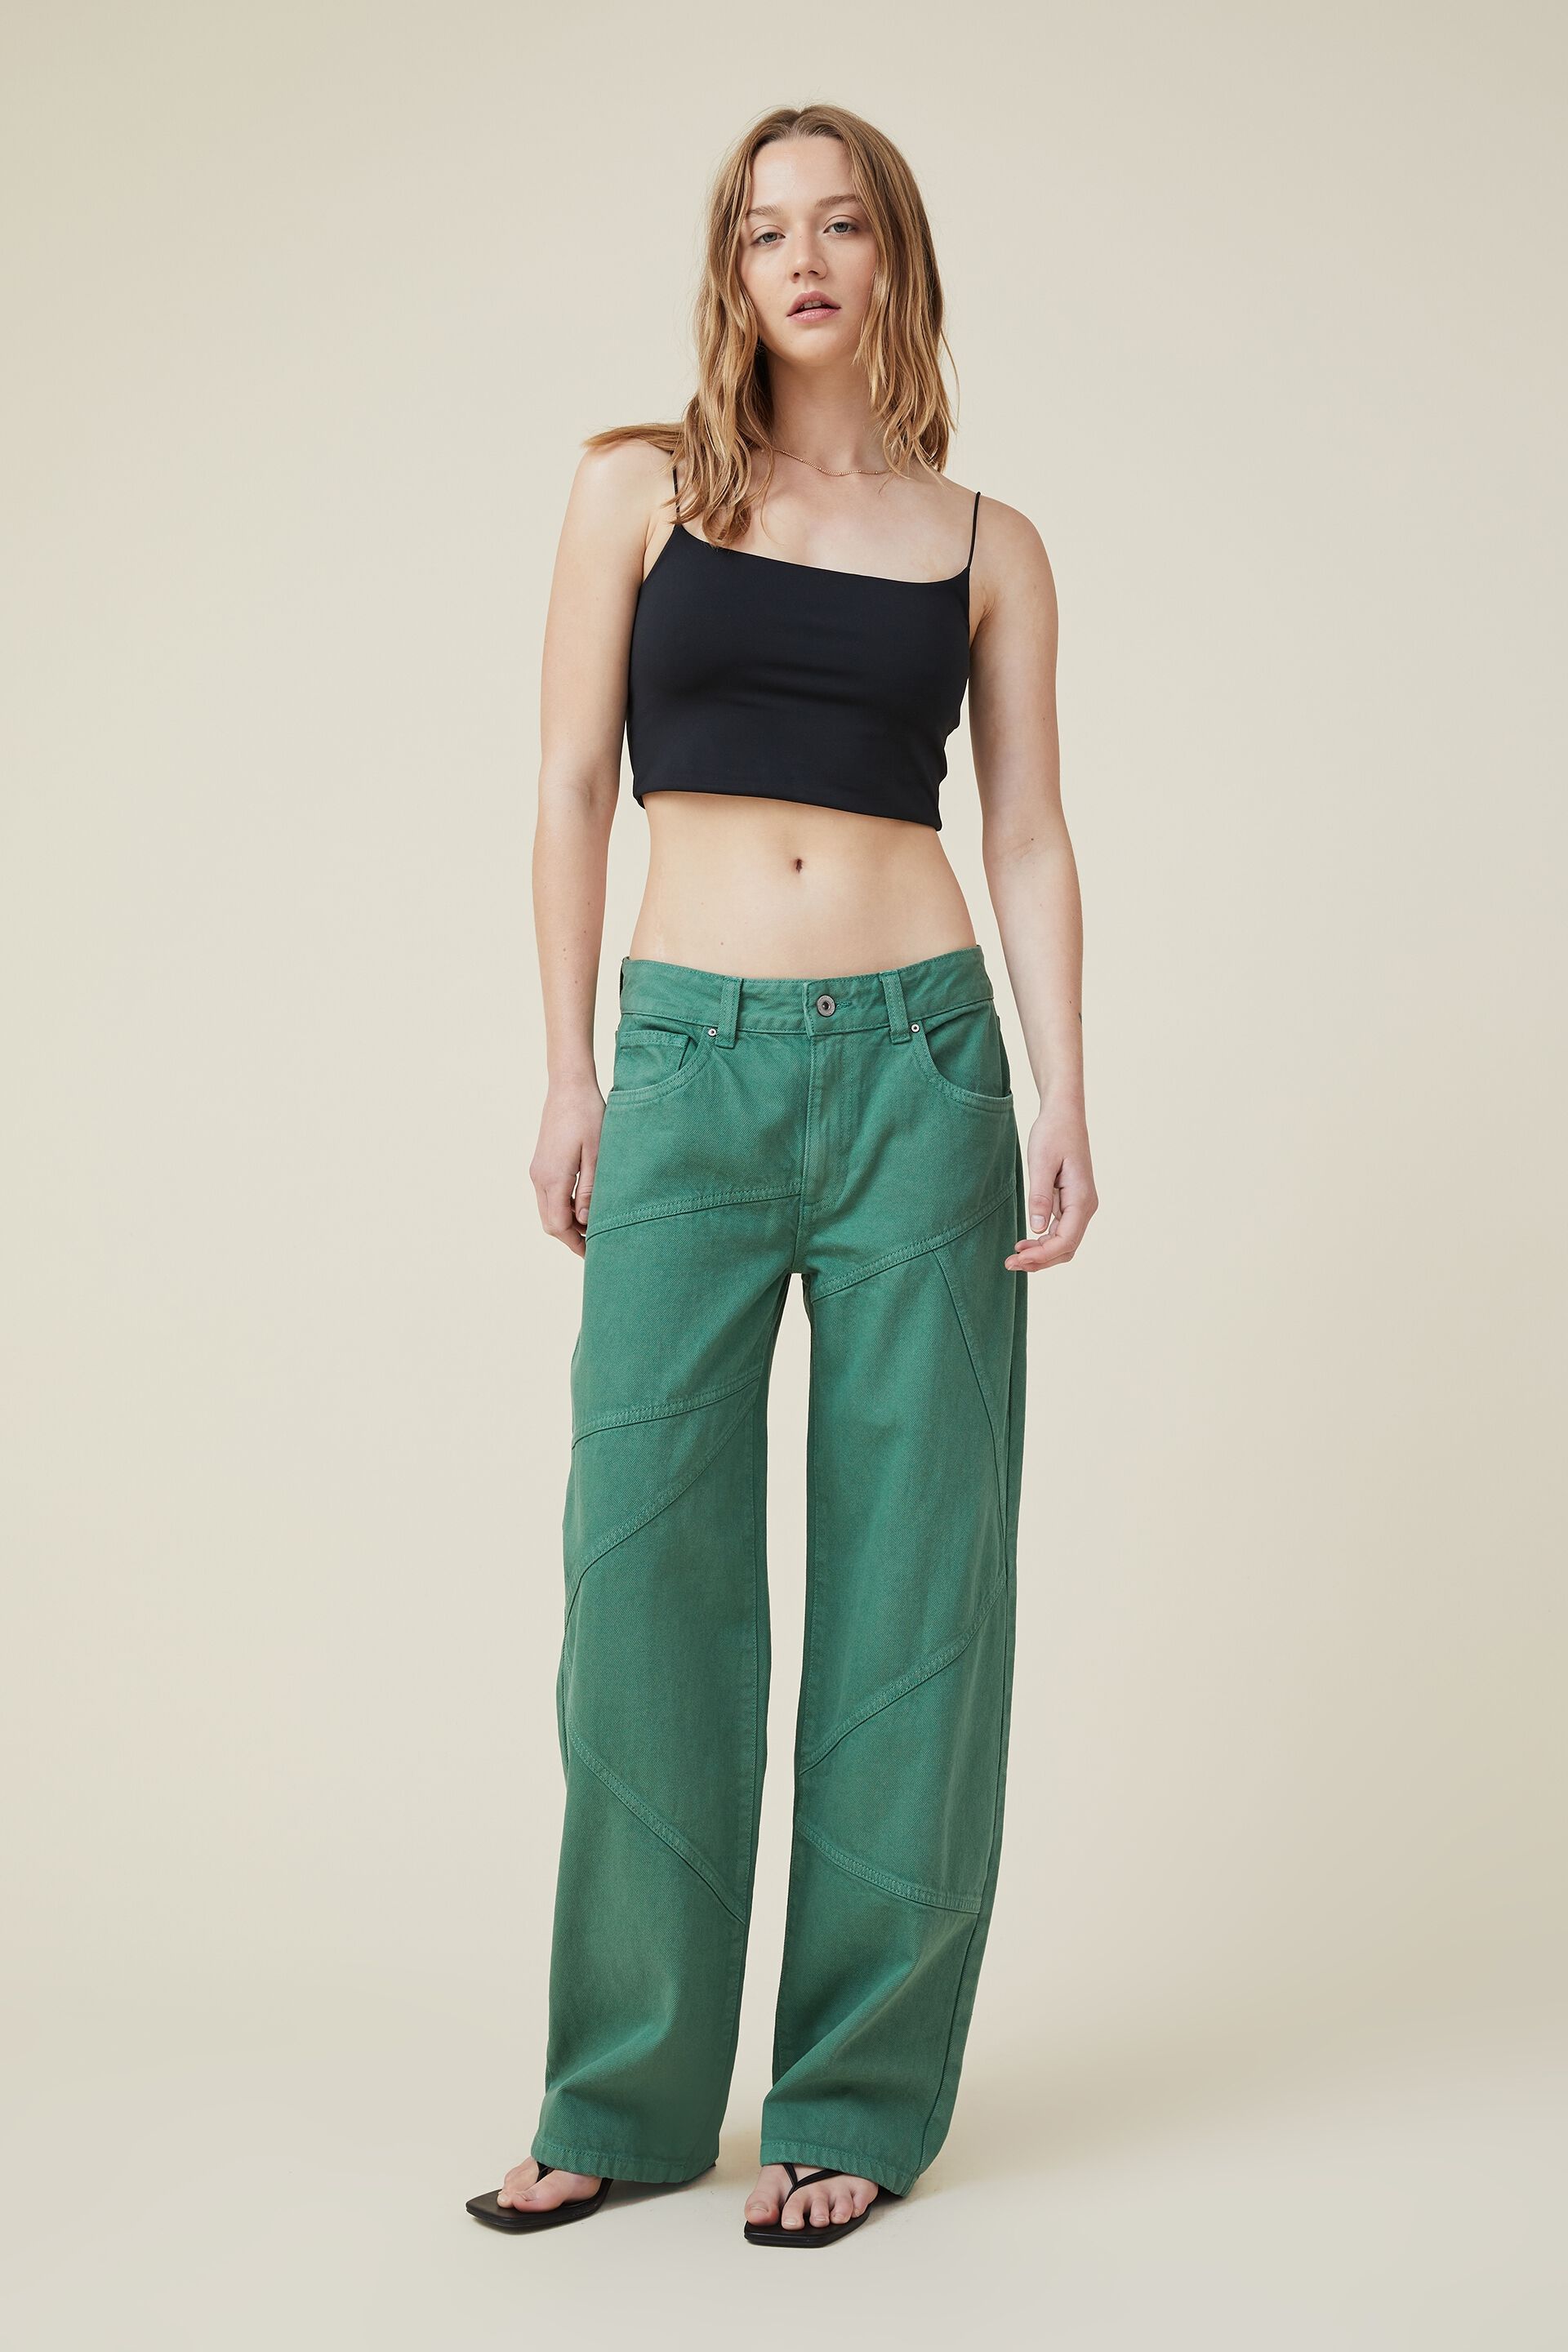 Pin on Pants for women